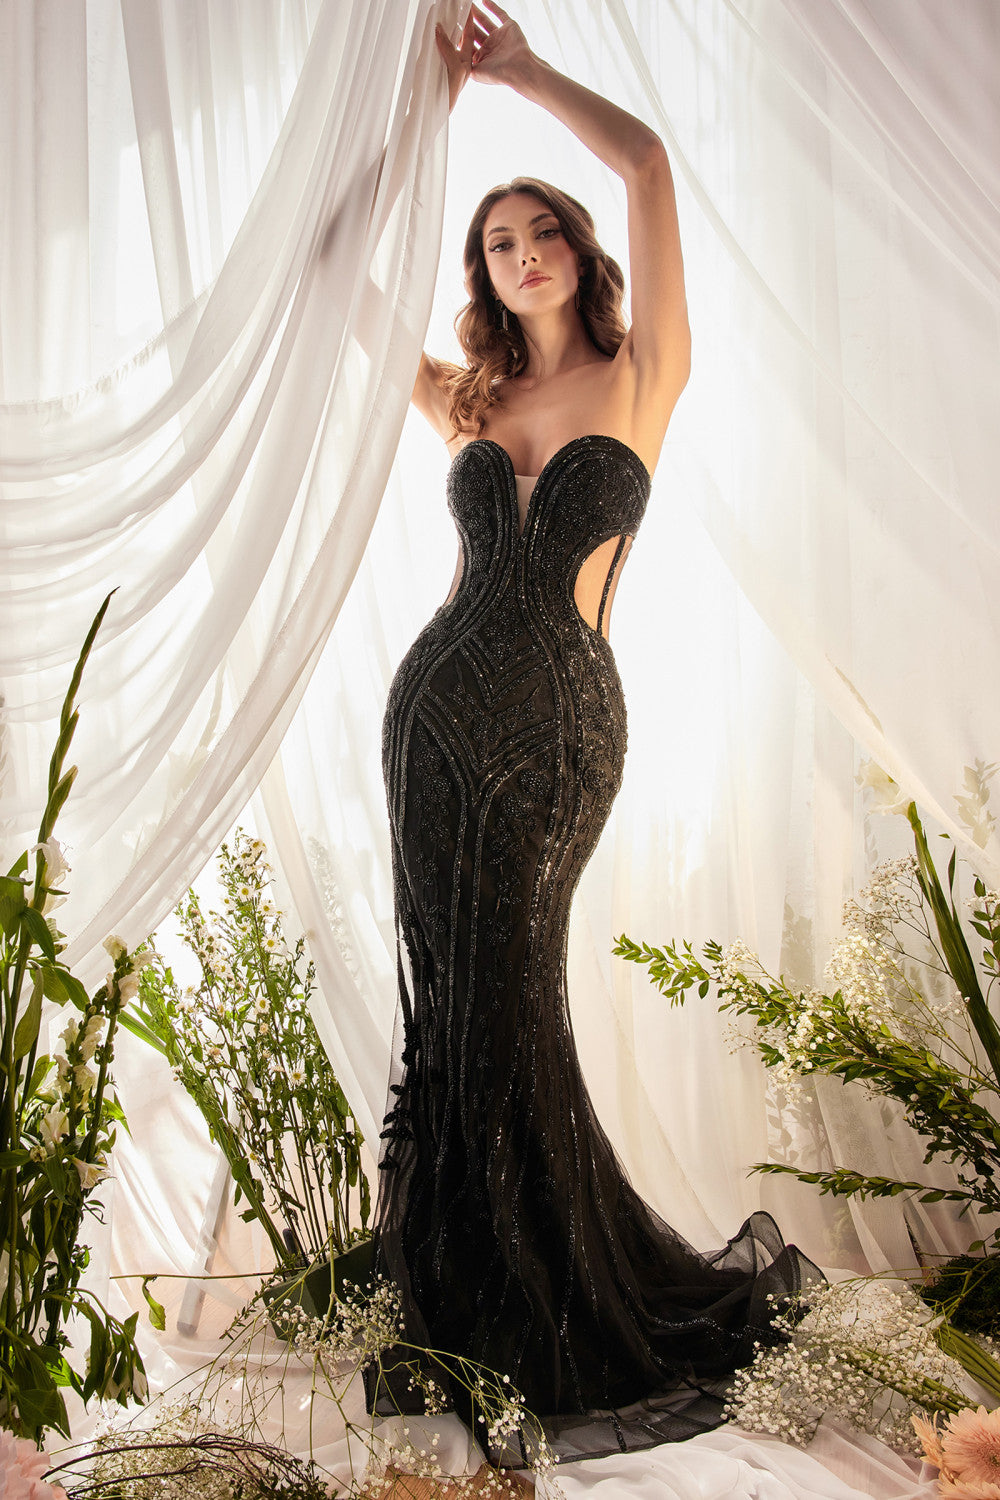 Share 133+ black lace mermaid gown